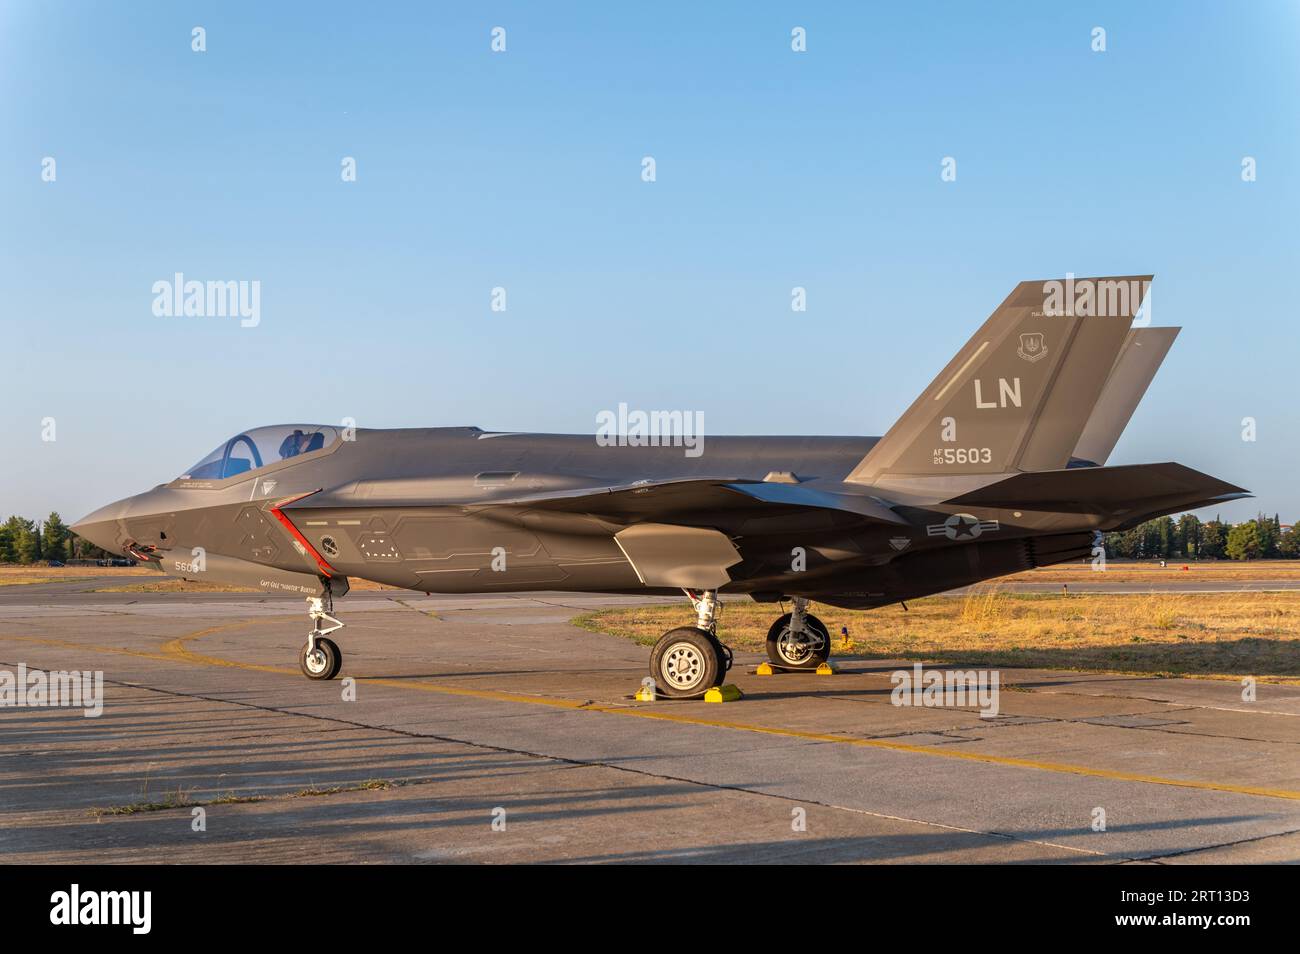 US Air force F-35 fighter jet on the ground Stock Photo